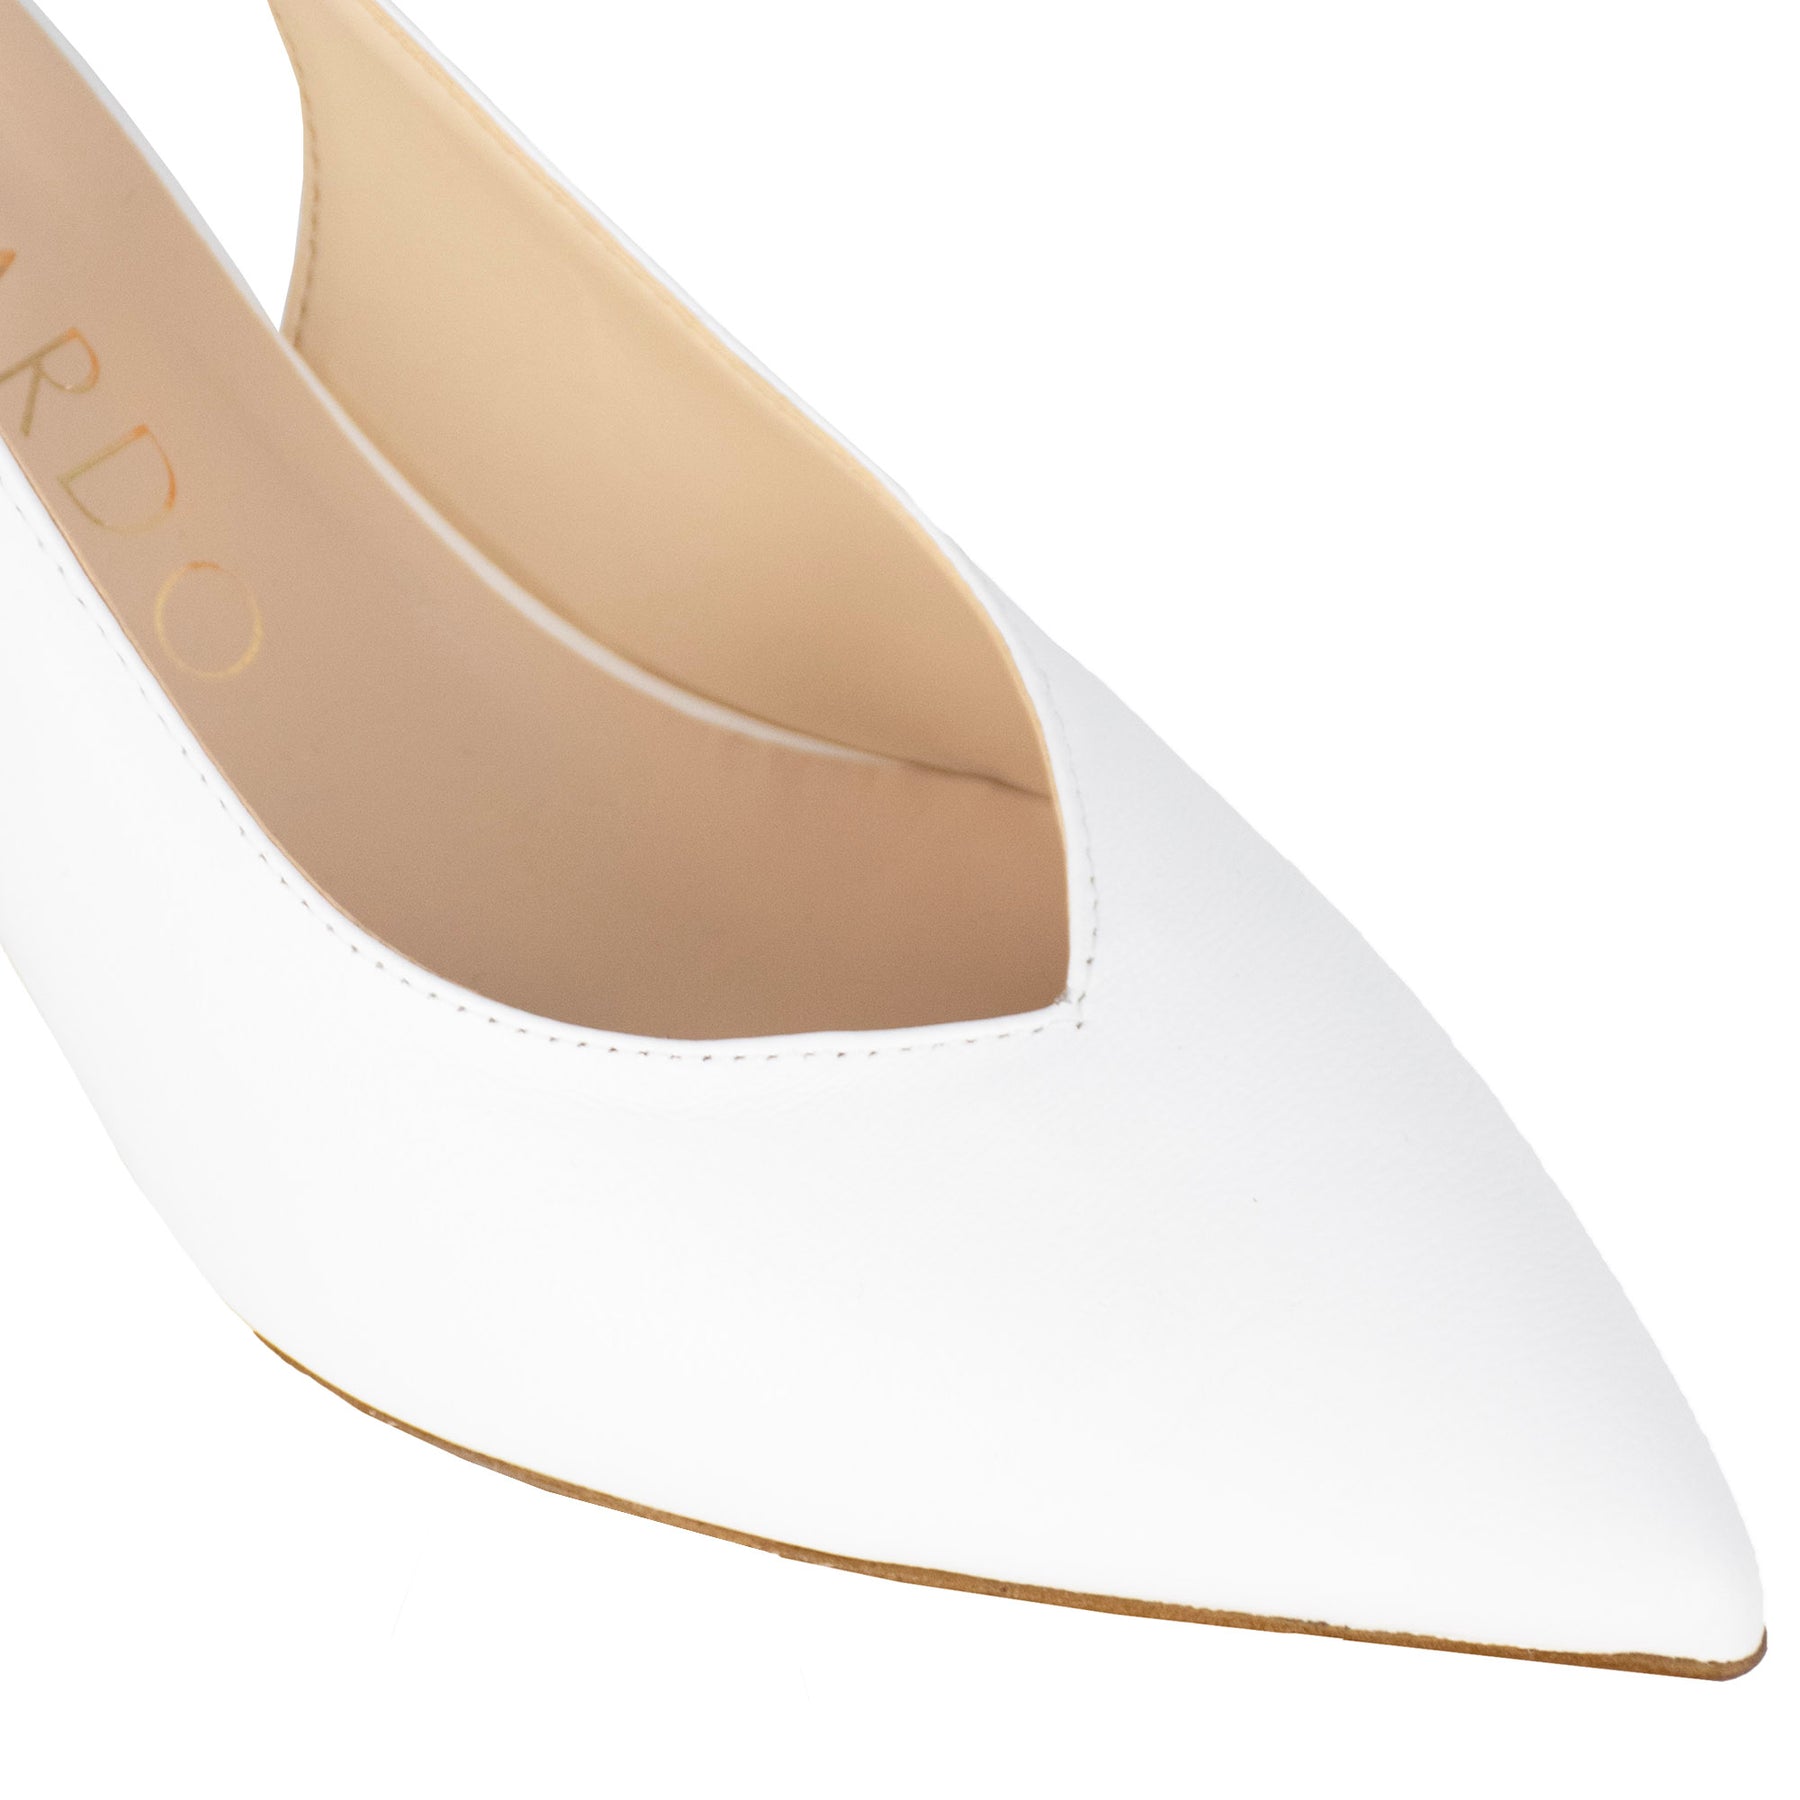 Women's slingback décolleté in white leather with medium heel